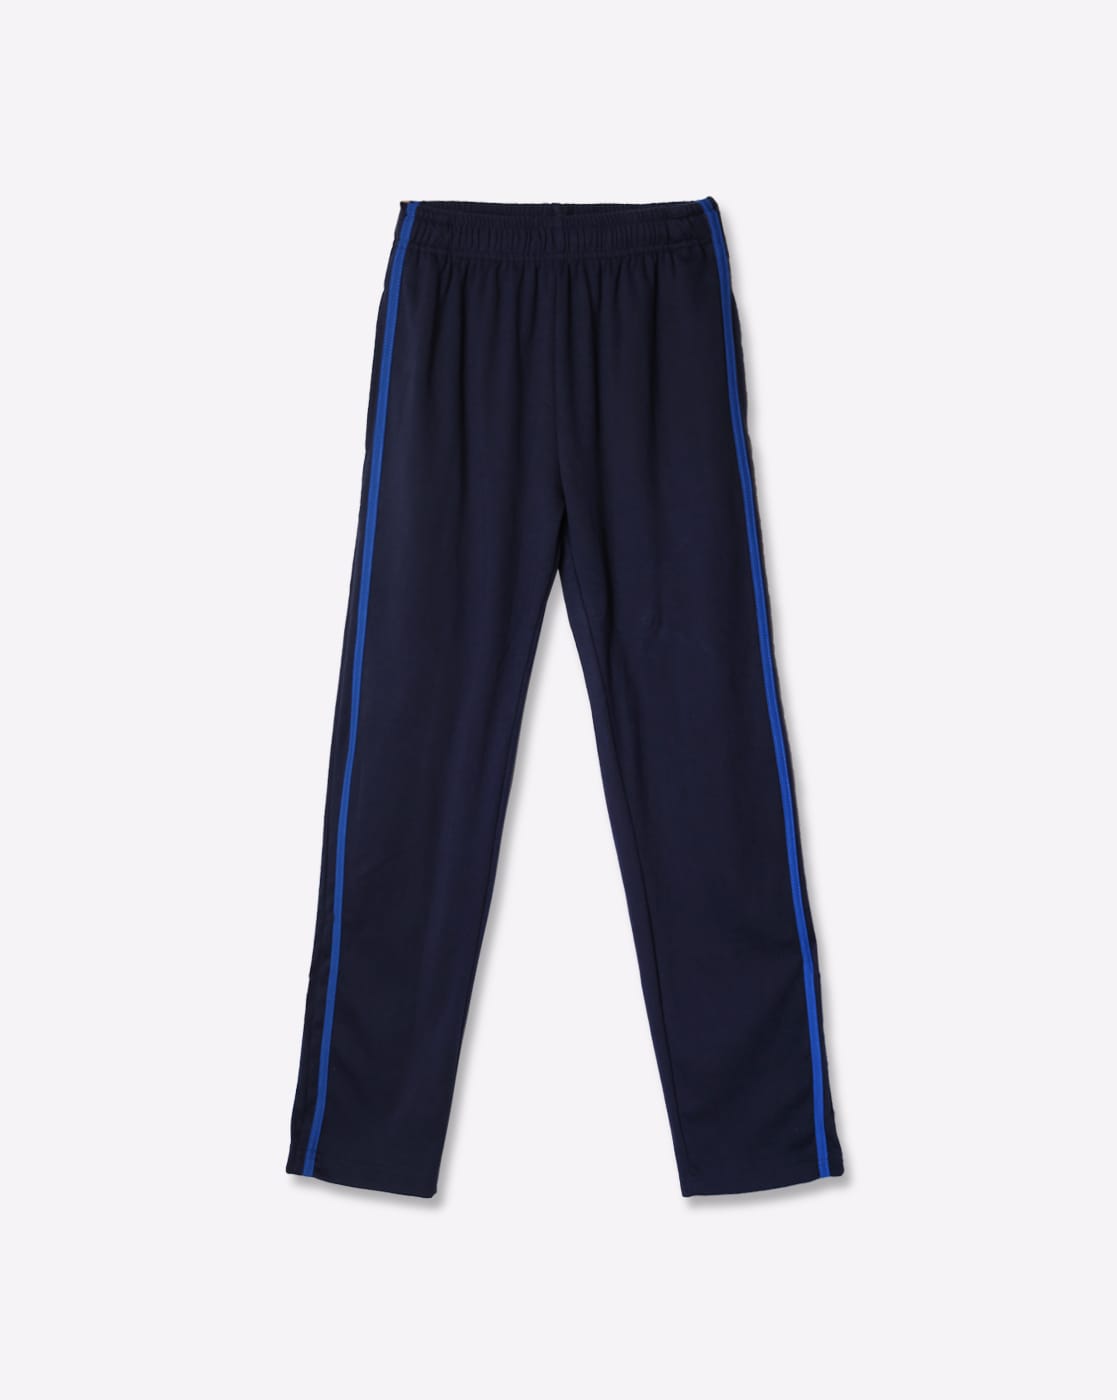 Trackpants: Shop Online GirlsRed, WhiteCottonTrackpants Online - Cliths.com